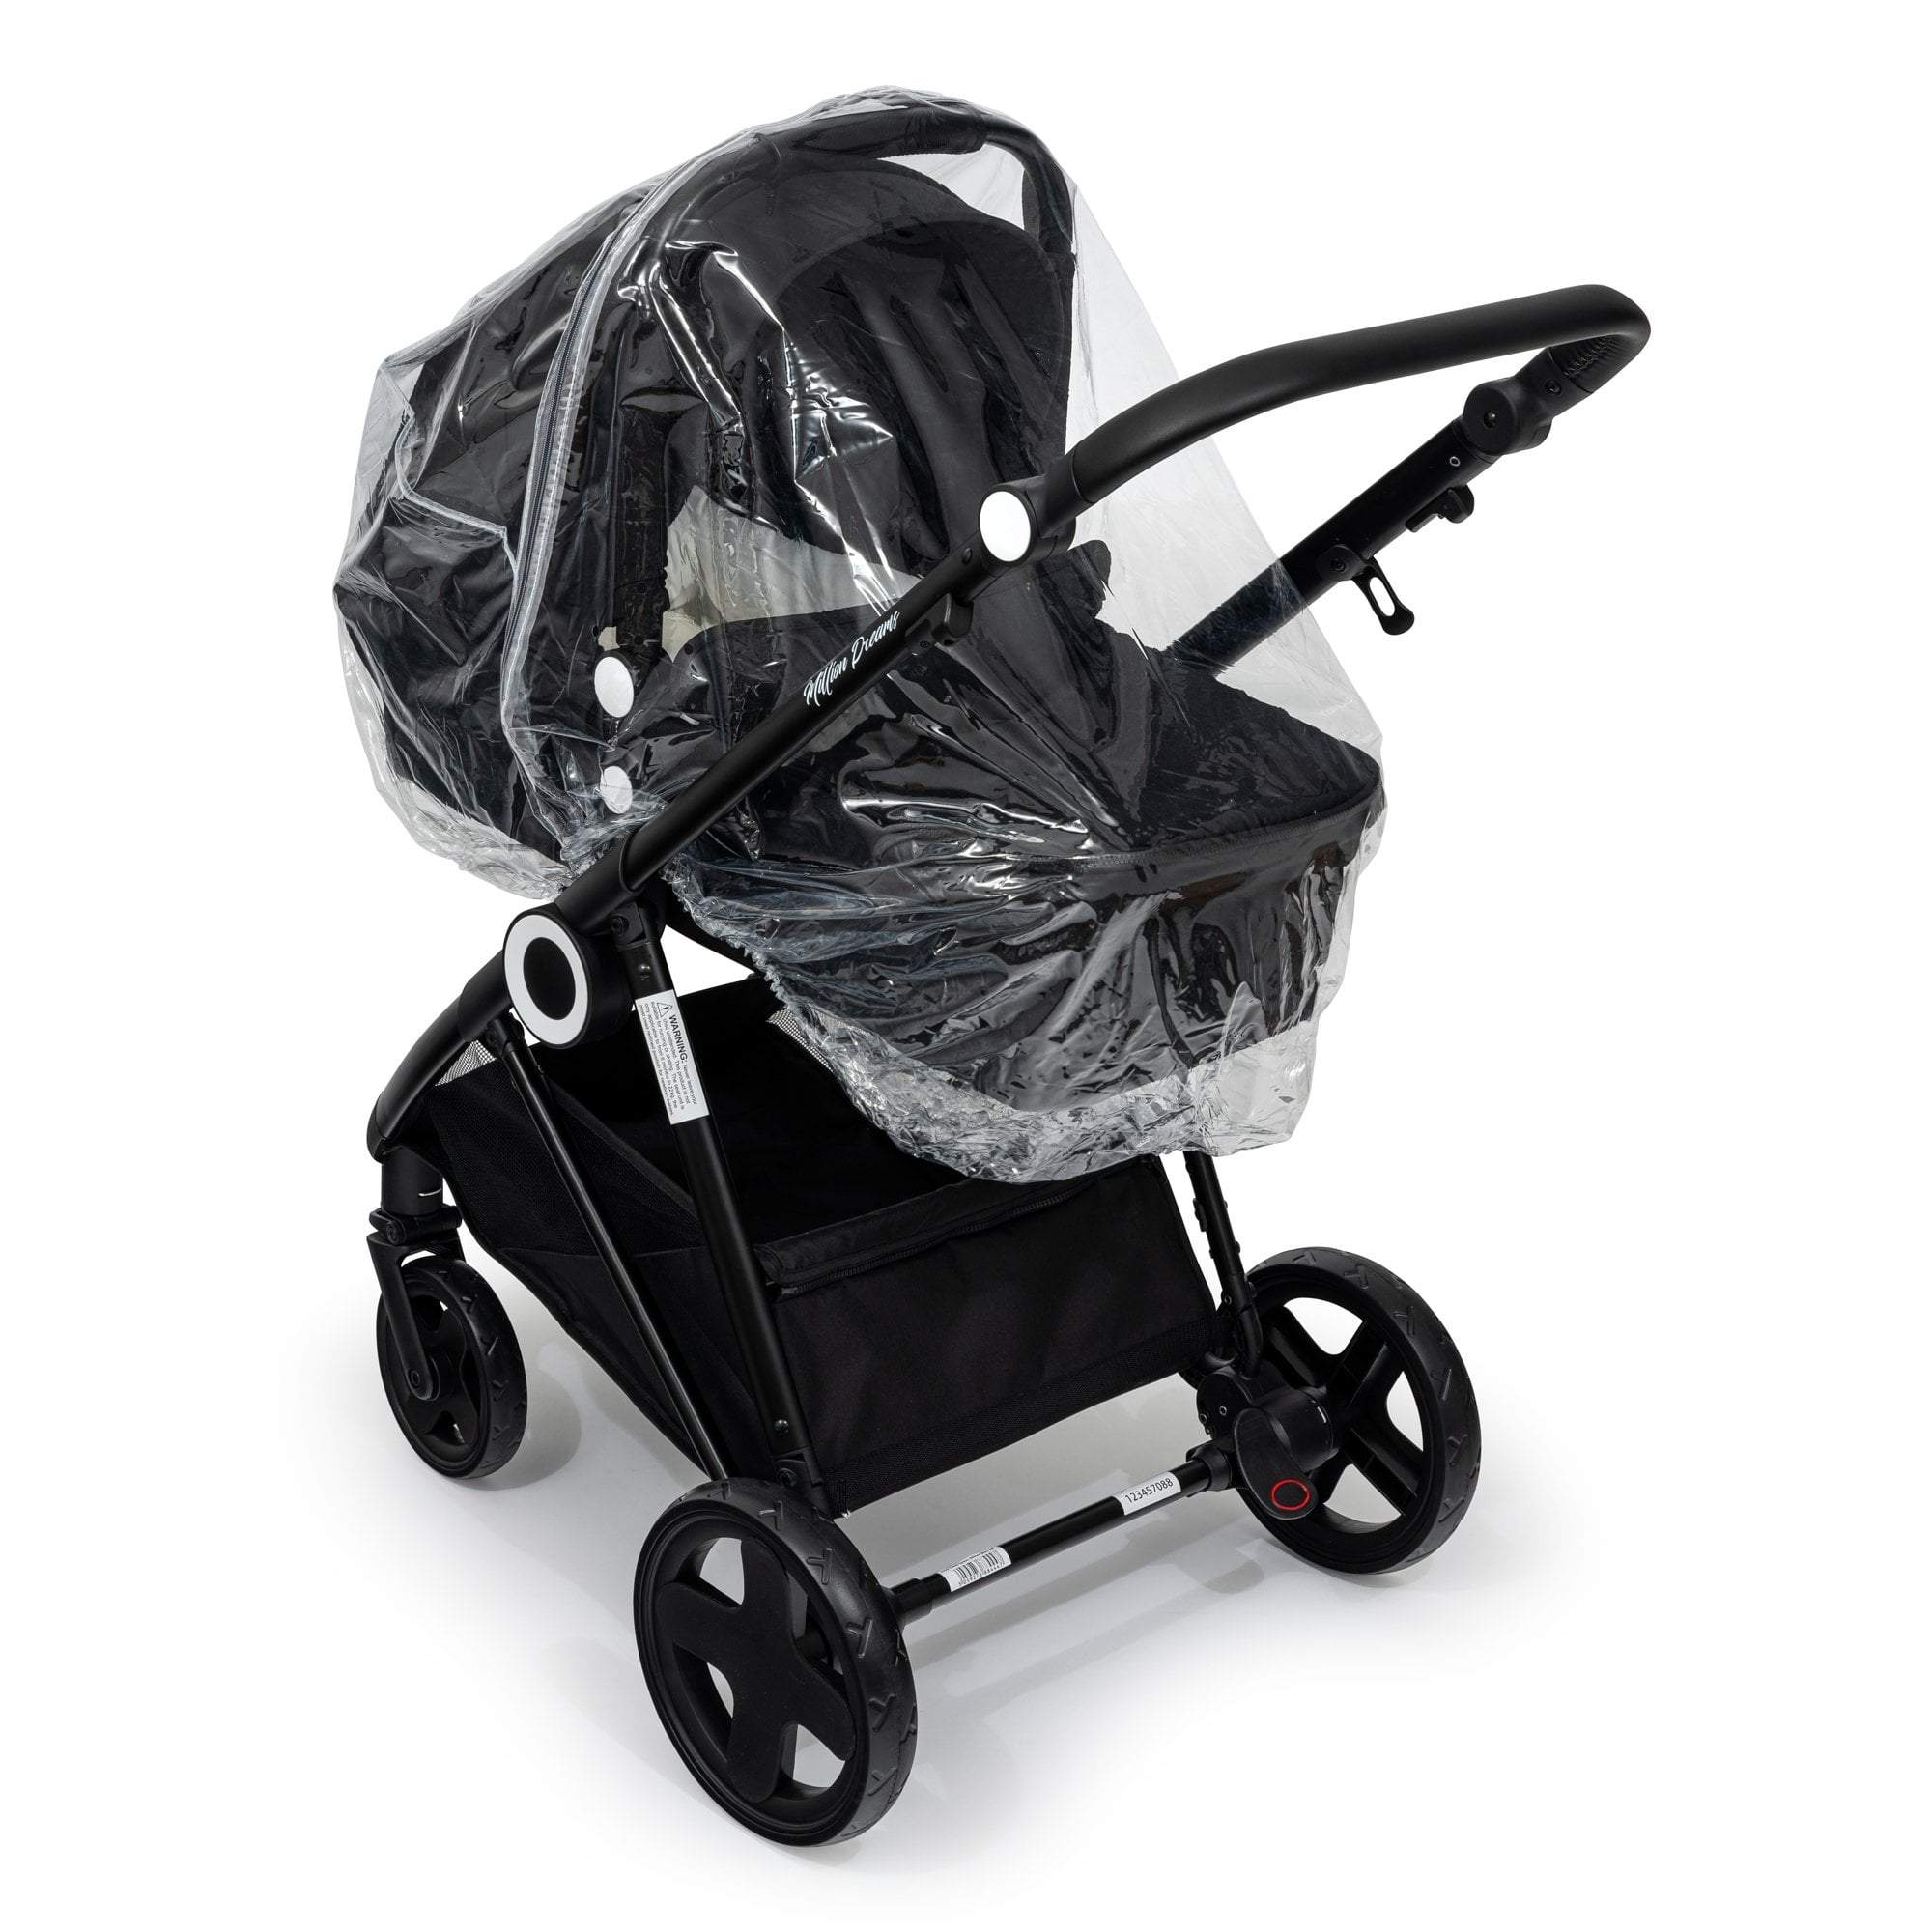 Carrycot Raincover Compatible With BabyDan - Fits All Models - For Your Little One